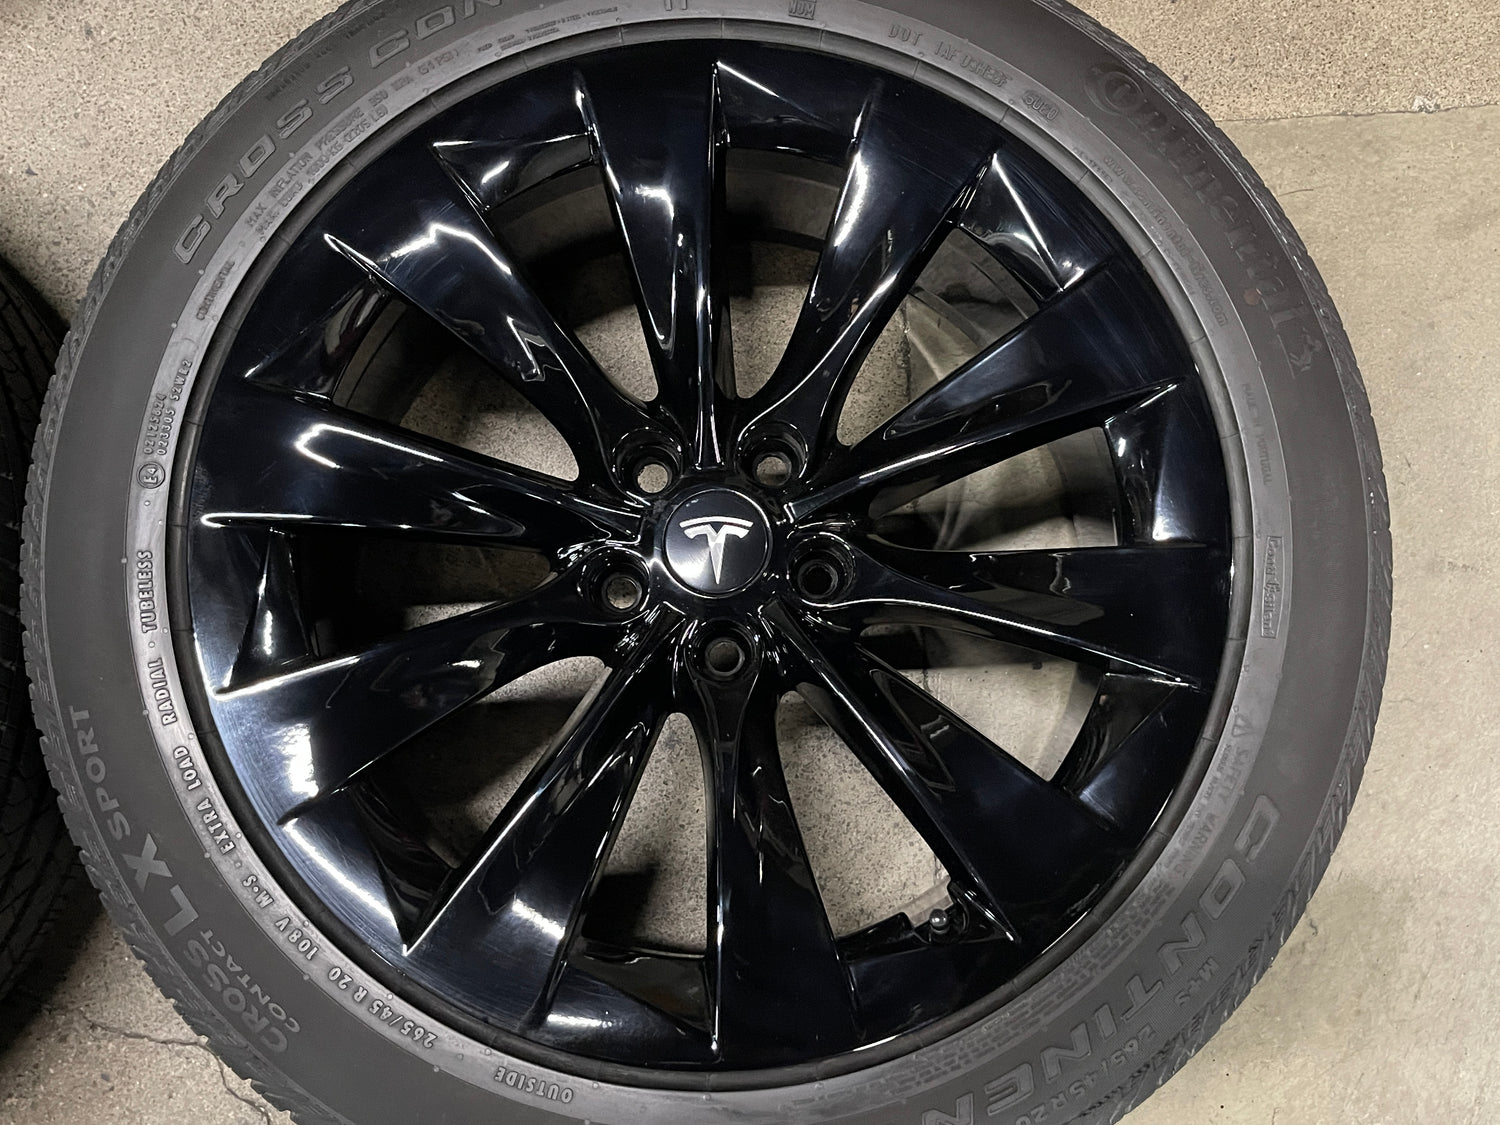 Tires out of balance? Check the foam. : r/teslamotors